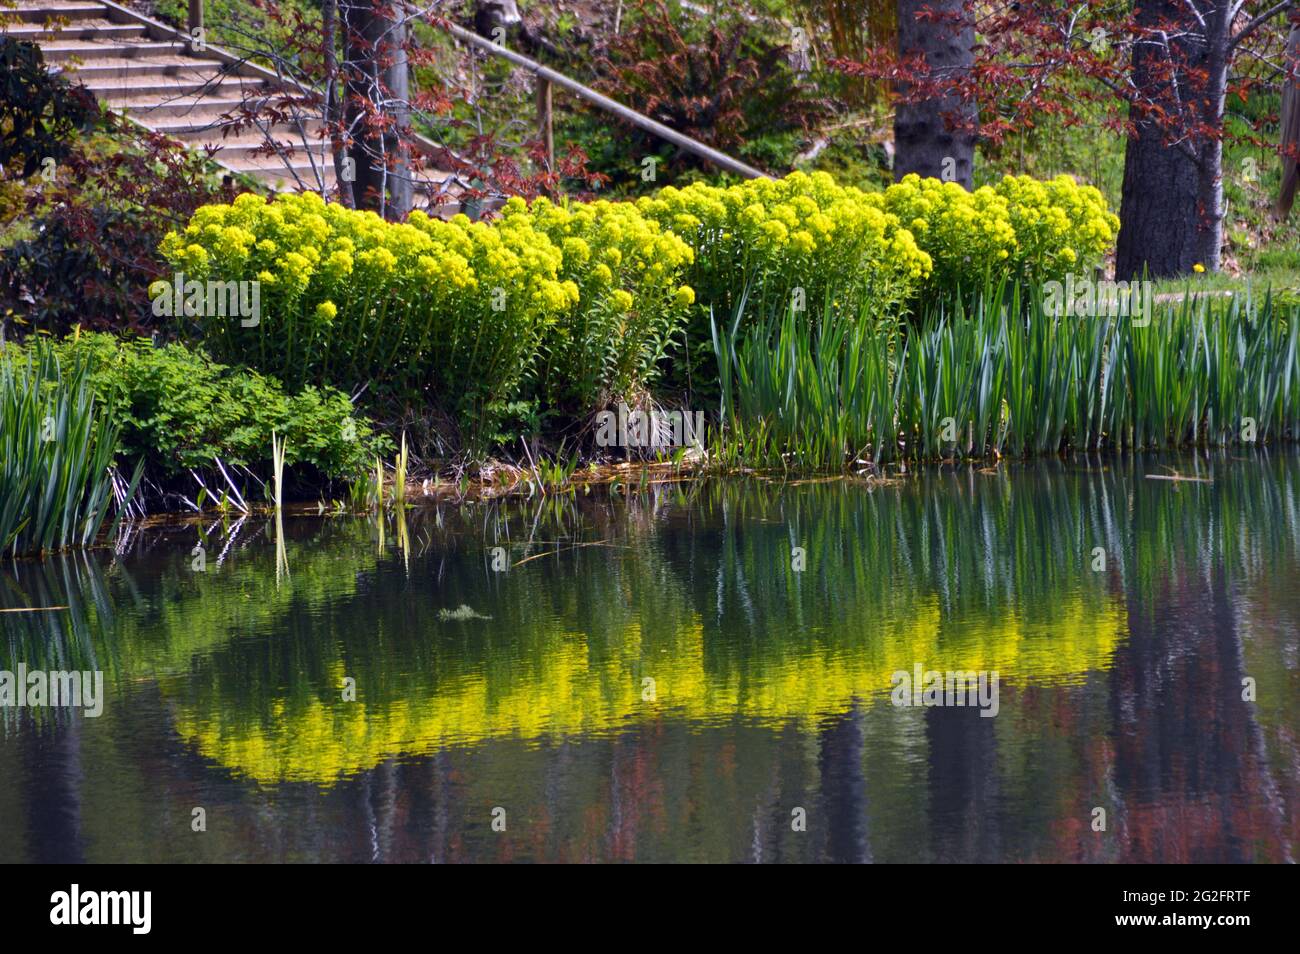 Reflections of Euphorbia Plants 'Spurge' on the Magnolia Lake at the Himalayan Garden & Sculpture Park, Grewelthorpe, Ripon, North Yorkshire, England. Stock Photo